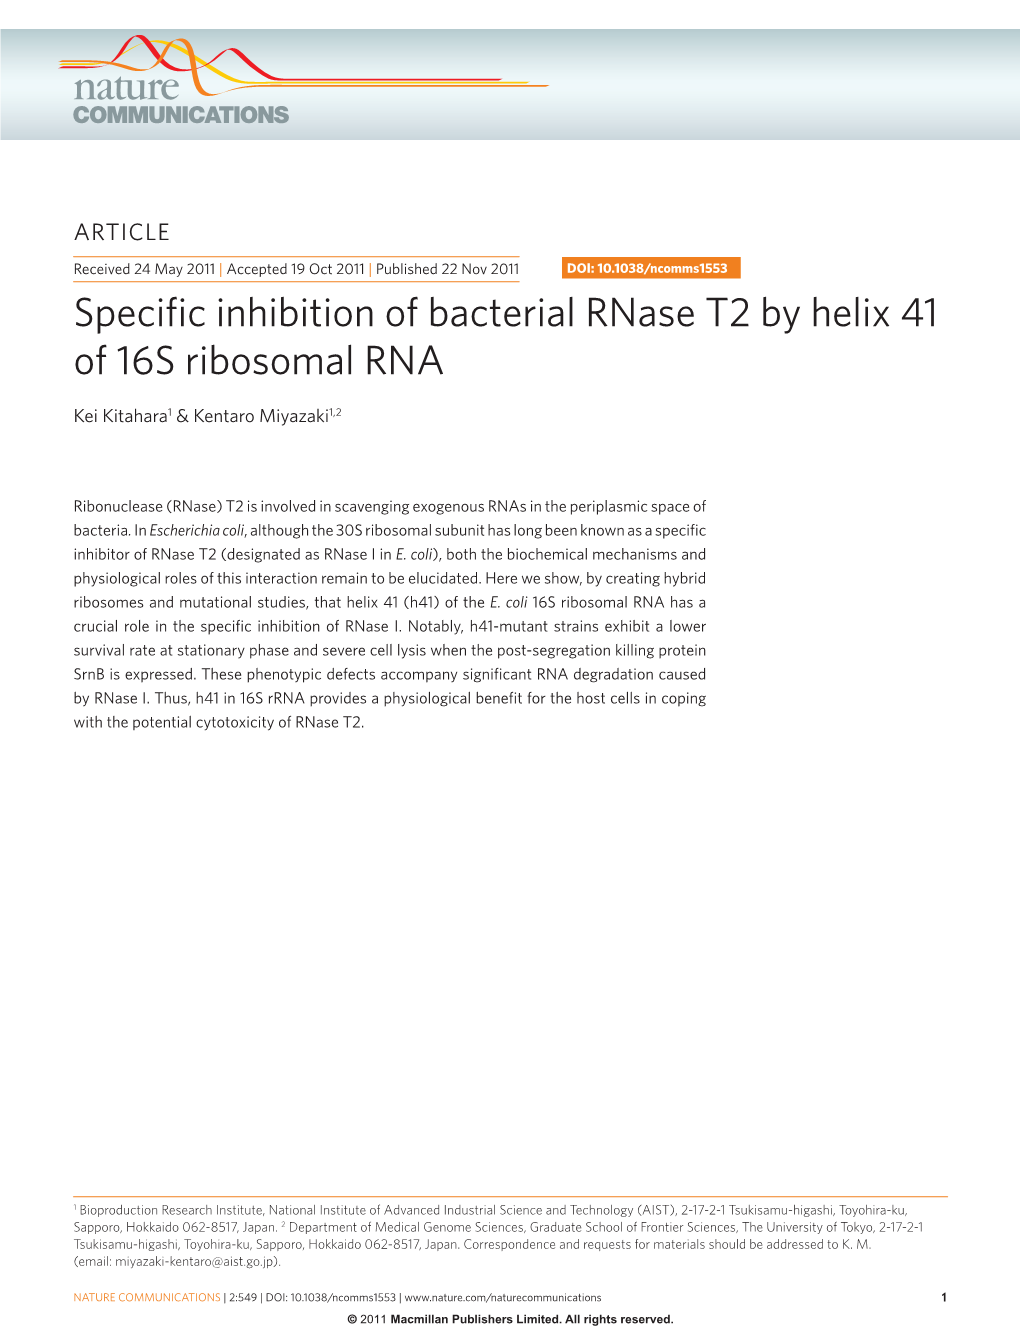 Specific Inhibition of Bacterial Rnase T2 by Helix 41 of 16S Ribosomal RNA